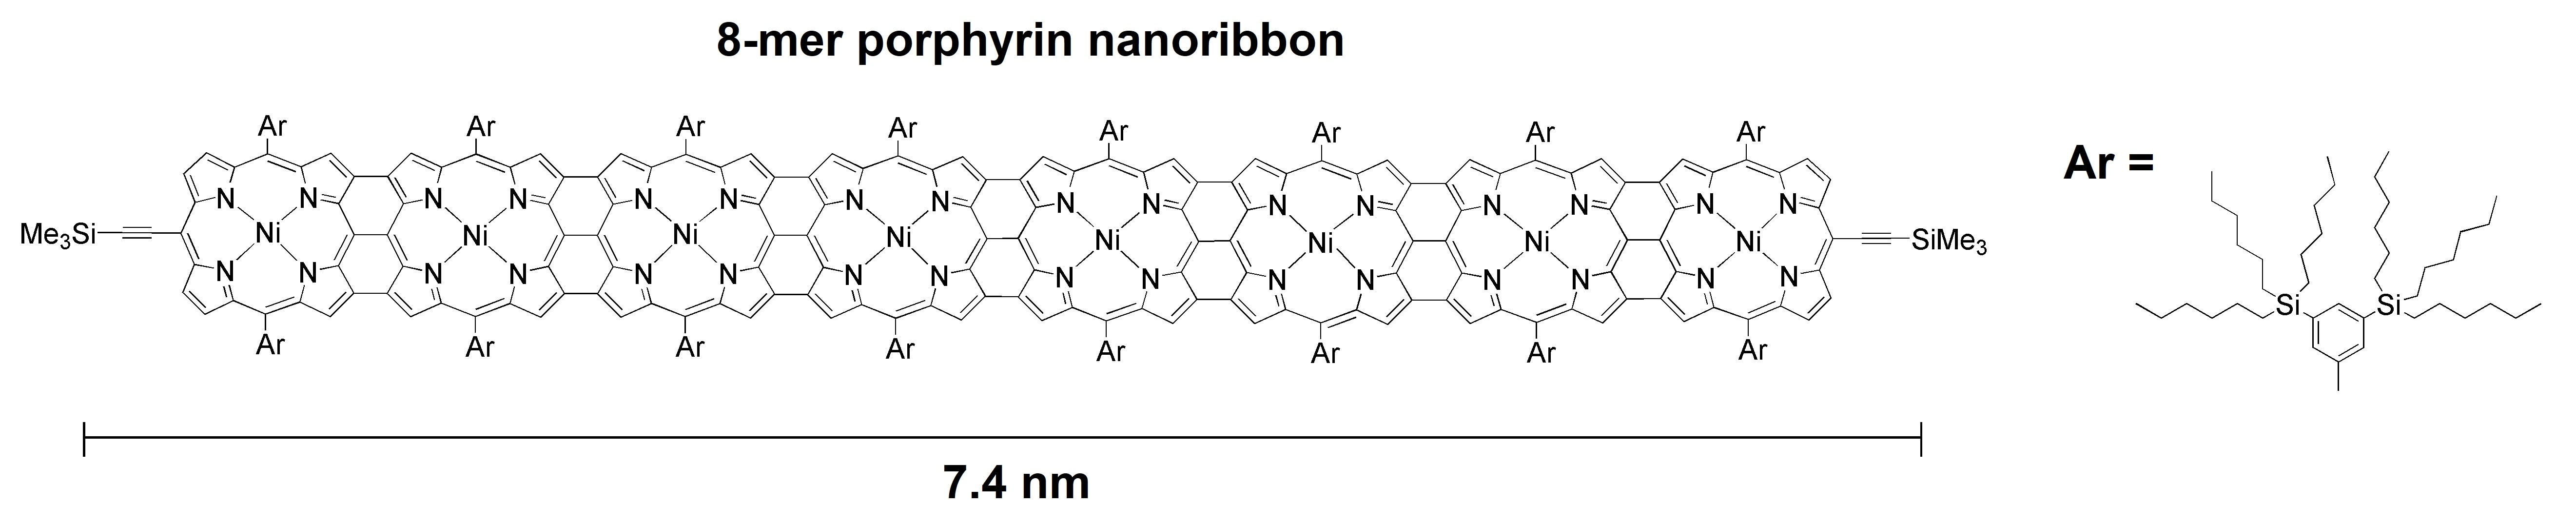 Chemical structure of the longest porphyrin nanoribbon measured with eight repeat units